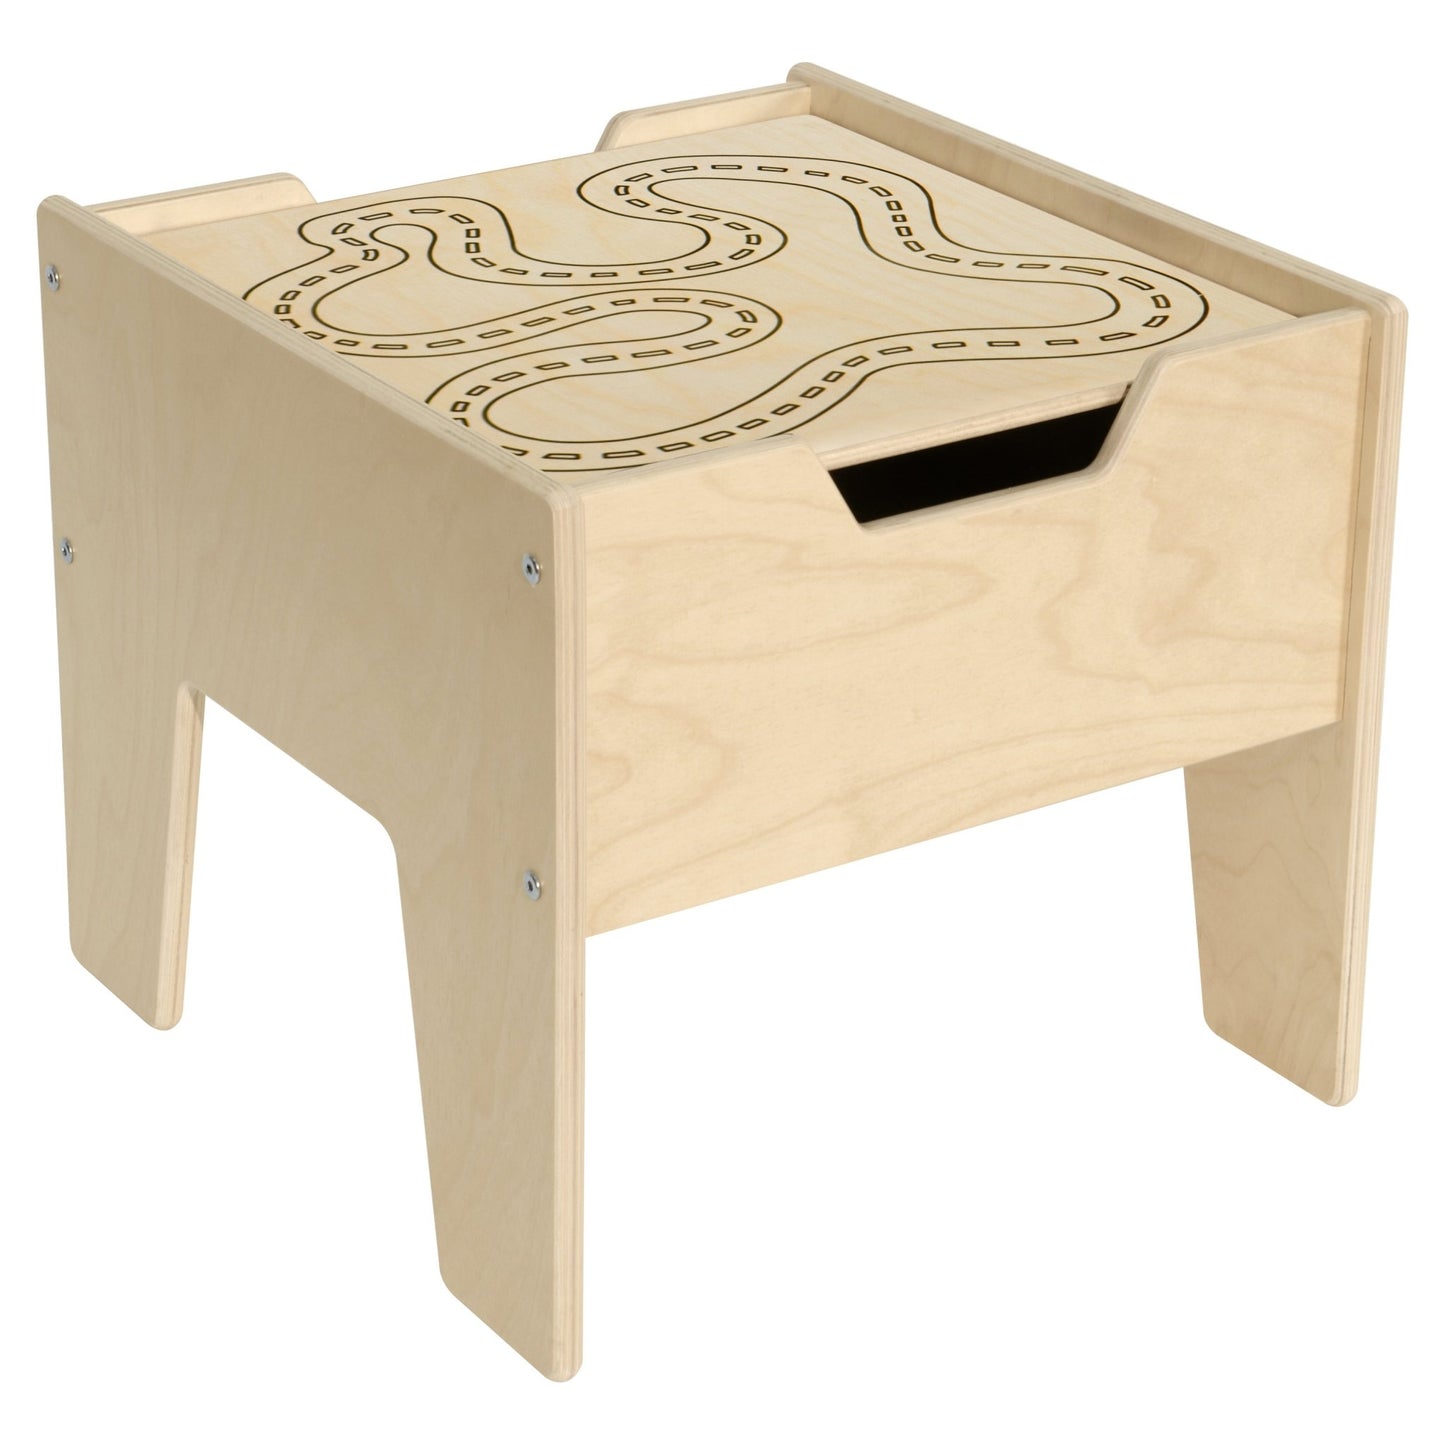 Wood Designs Contender 2-N-1 Activity Table with LEGO® Compatible Top - (C991300) - SchoolOutlet